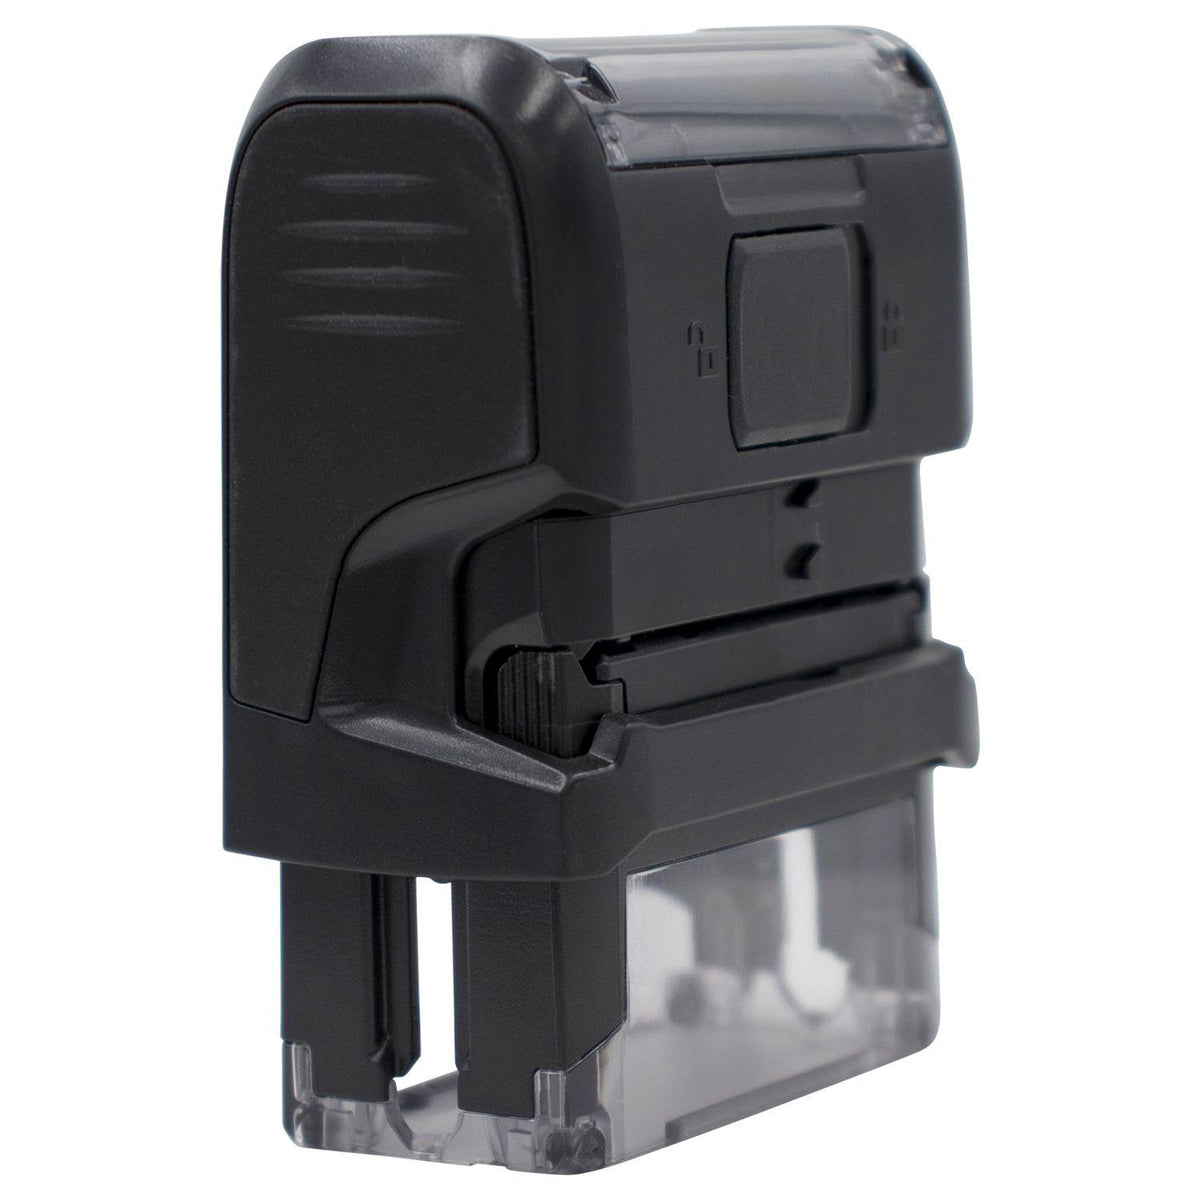 Large Self-Inking Bold Recibido Stamp Back View